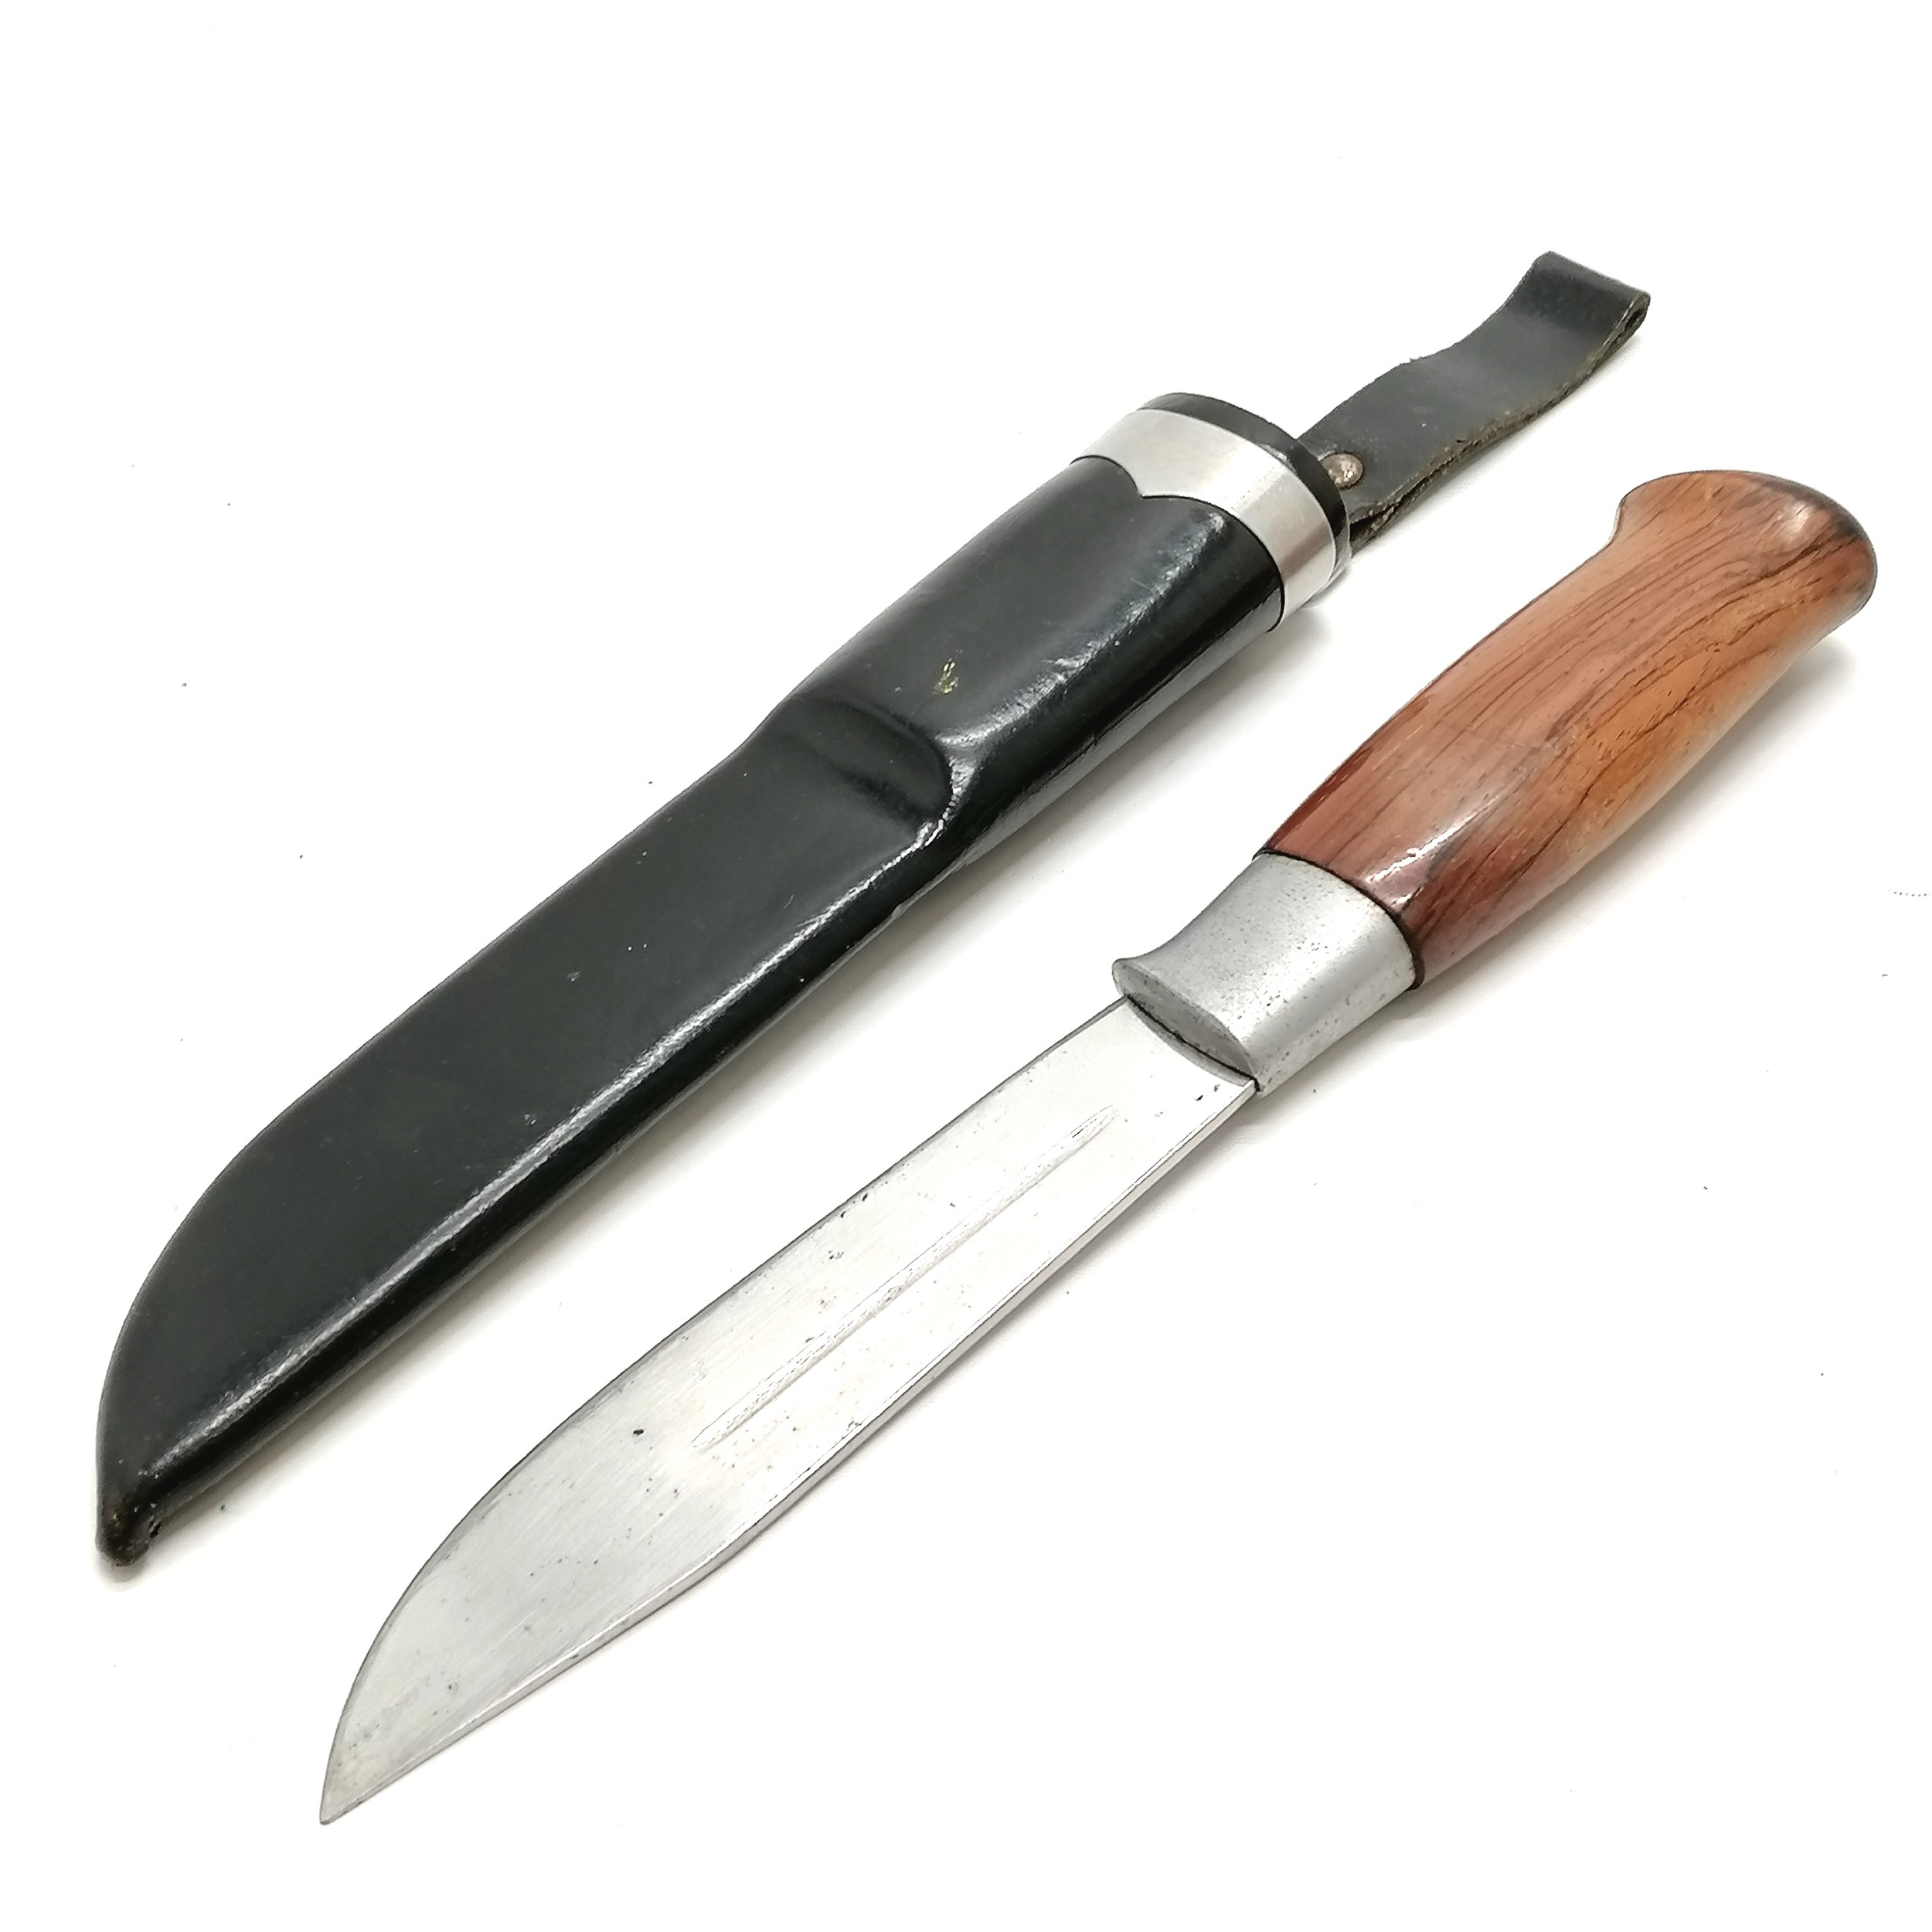 Brusletto Geilo Norwegian hunting knife in sheath (total length 27cm) t/w antique folding knife / - Image 10 of 10